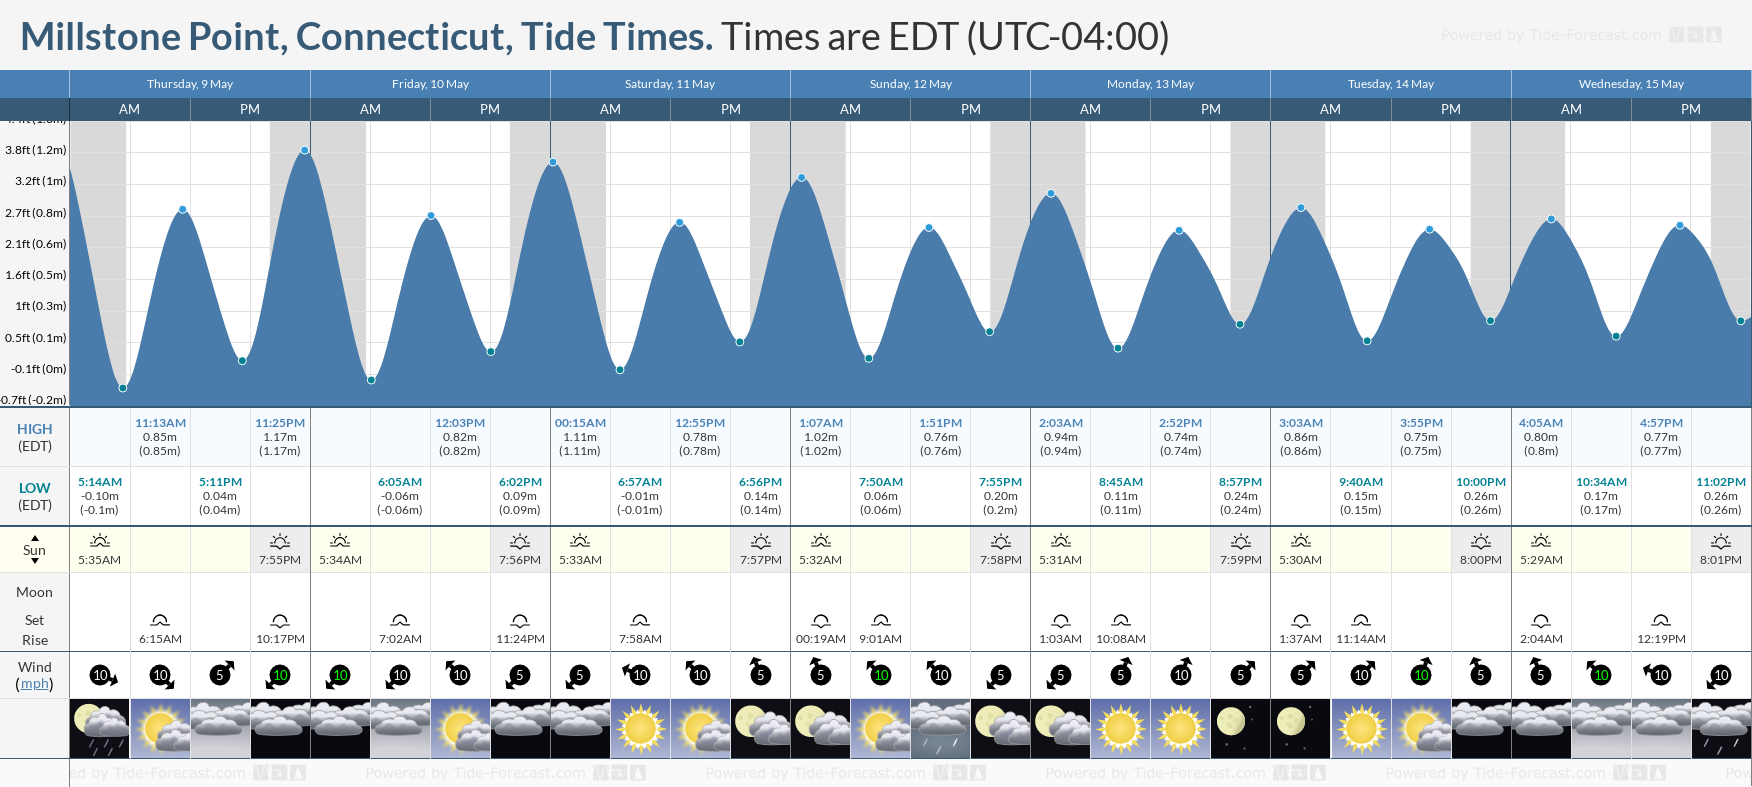 Millstone Point, Connecticut Tide Chart including high and low tide tide times for the next 7 days